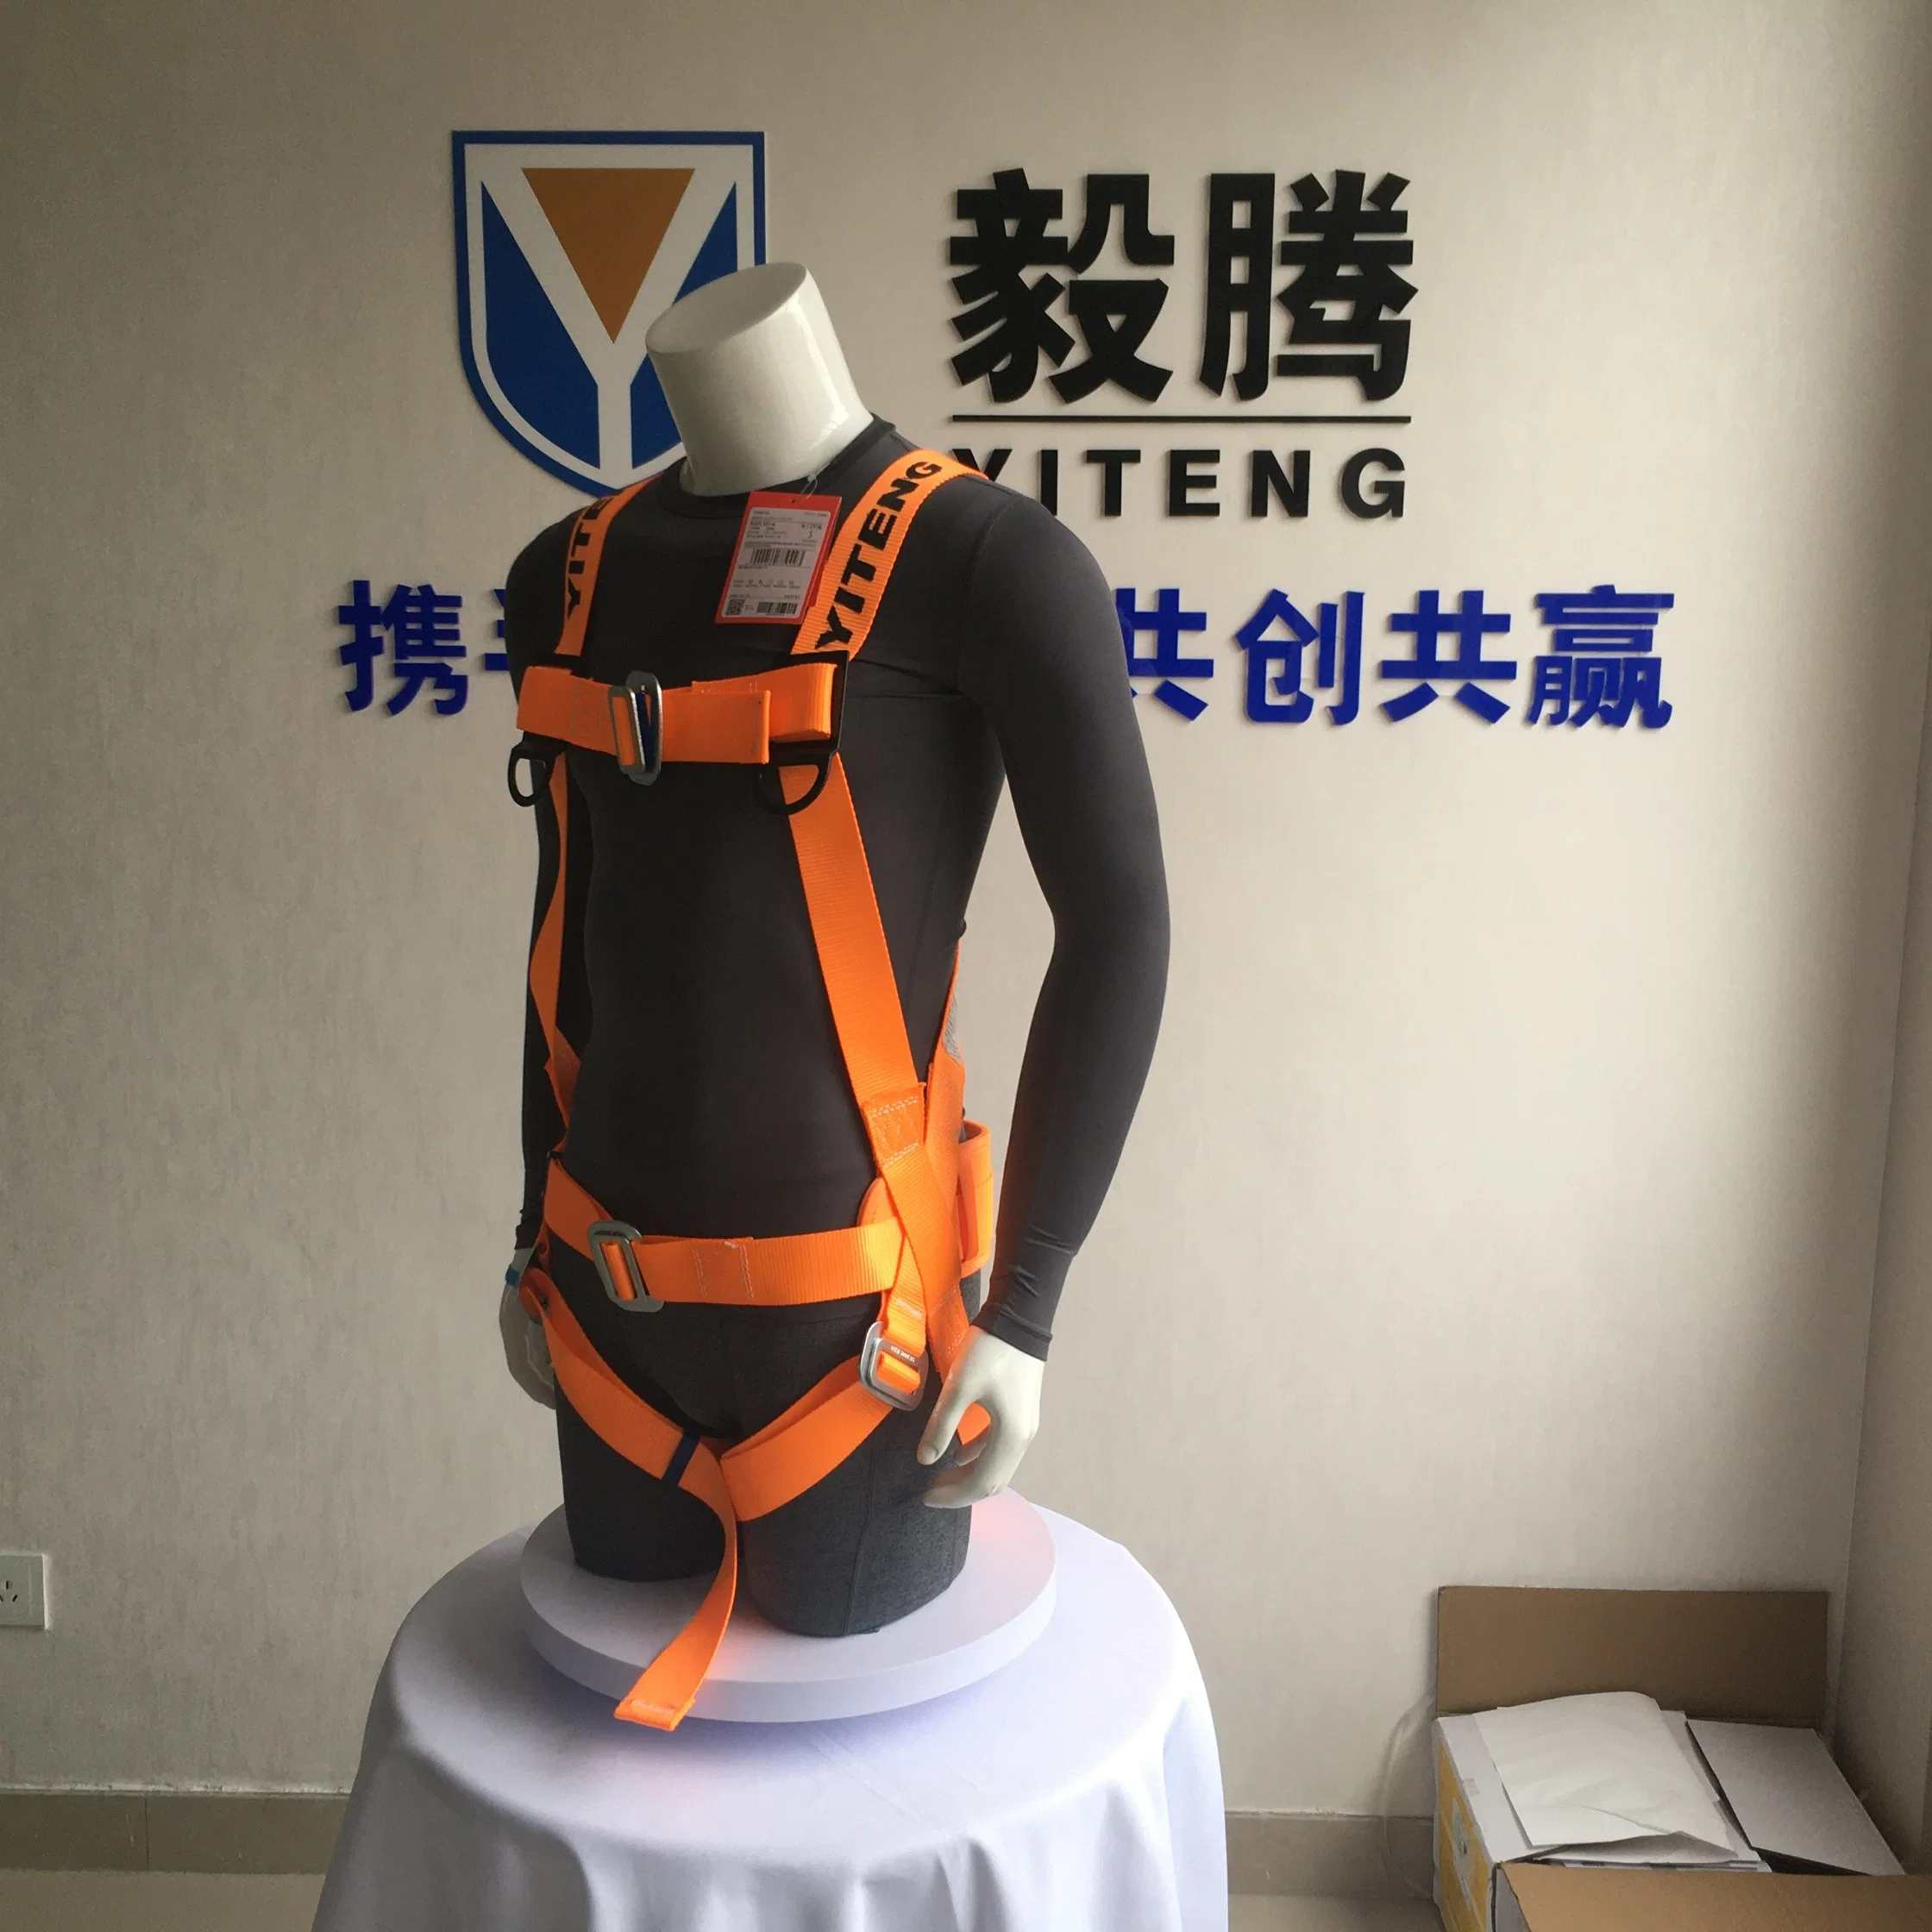 Zl-006 Ful Body Polyester Belt Zinc-Coated Hook Rope with Absorber Packet 5 Point Fall Protection Harness for Construction Industry Electrical Engineering